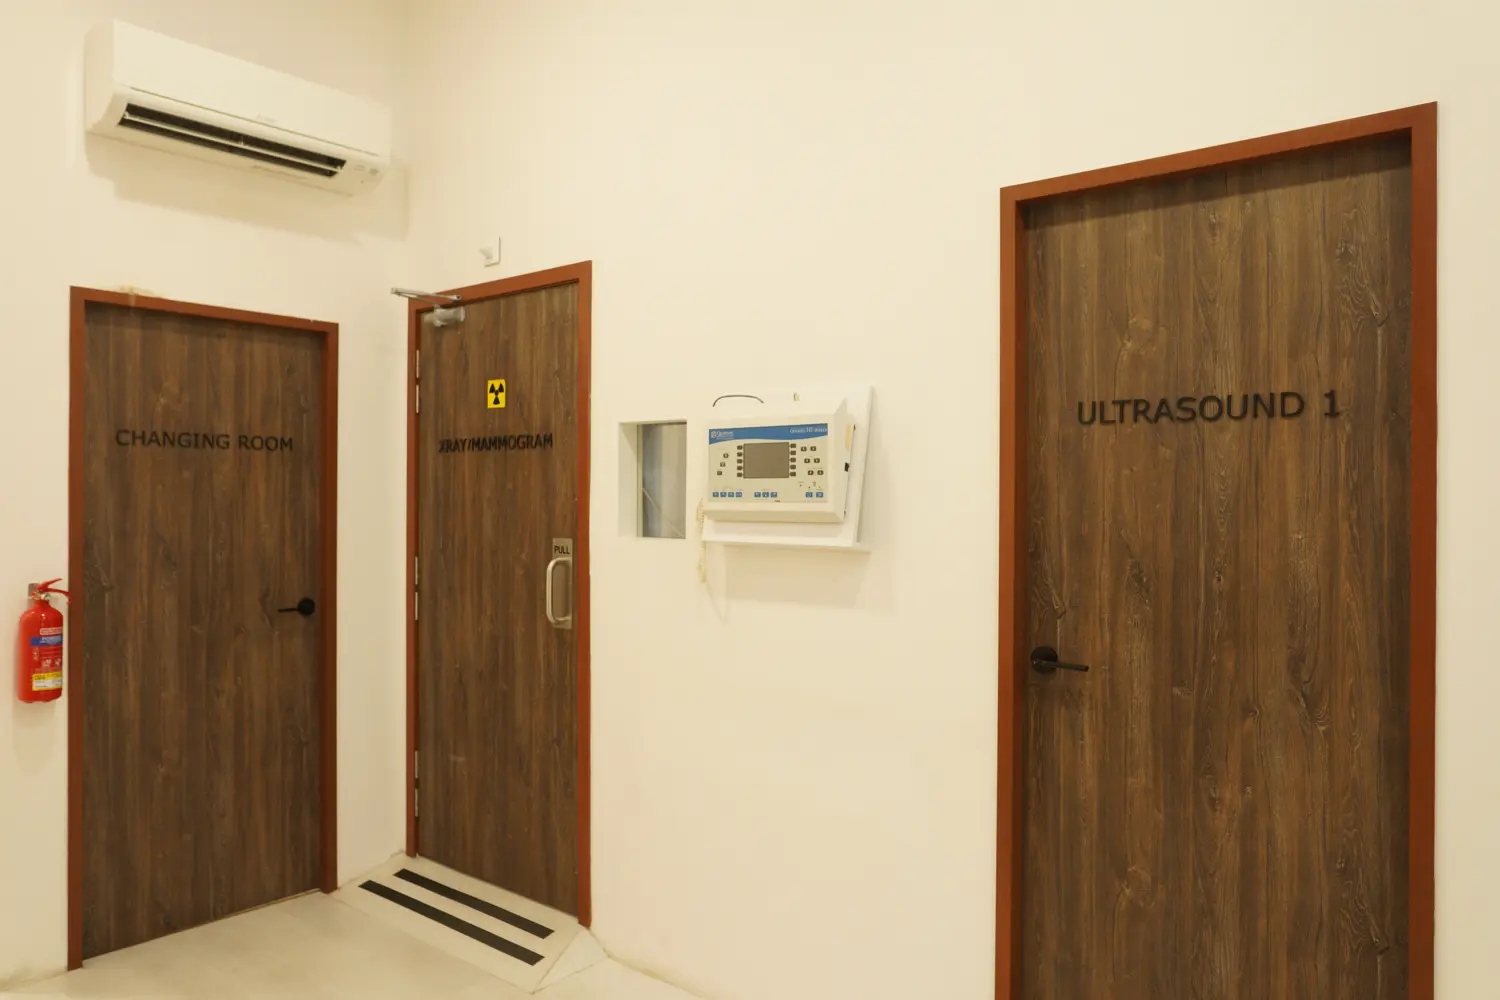 Scanning and changing area with X-Ray, Mammogram, and ultrasound scan rooms